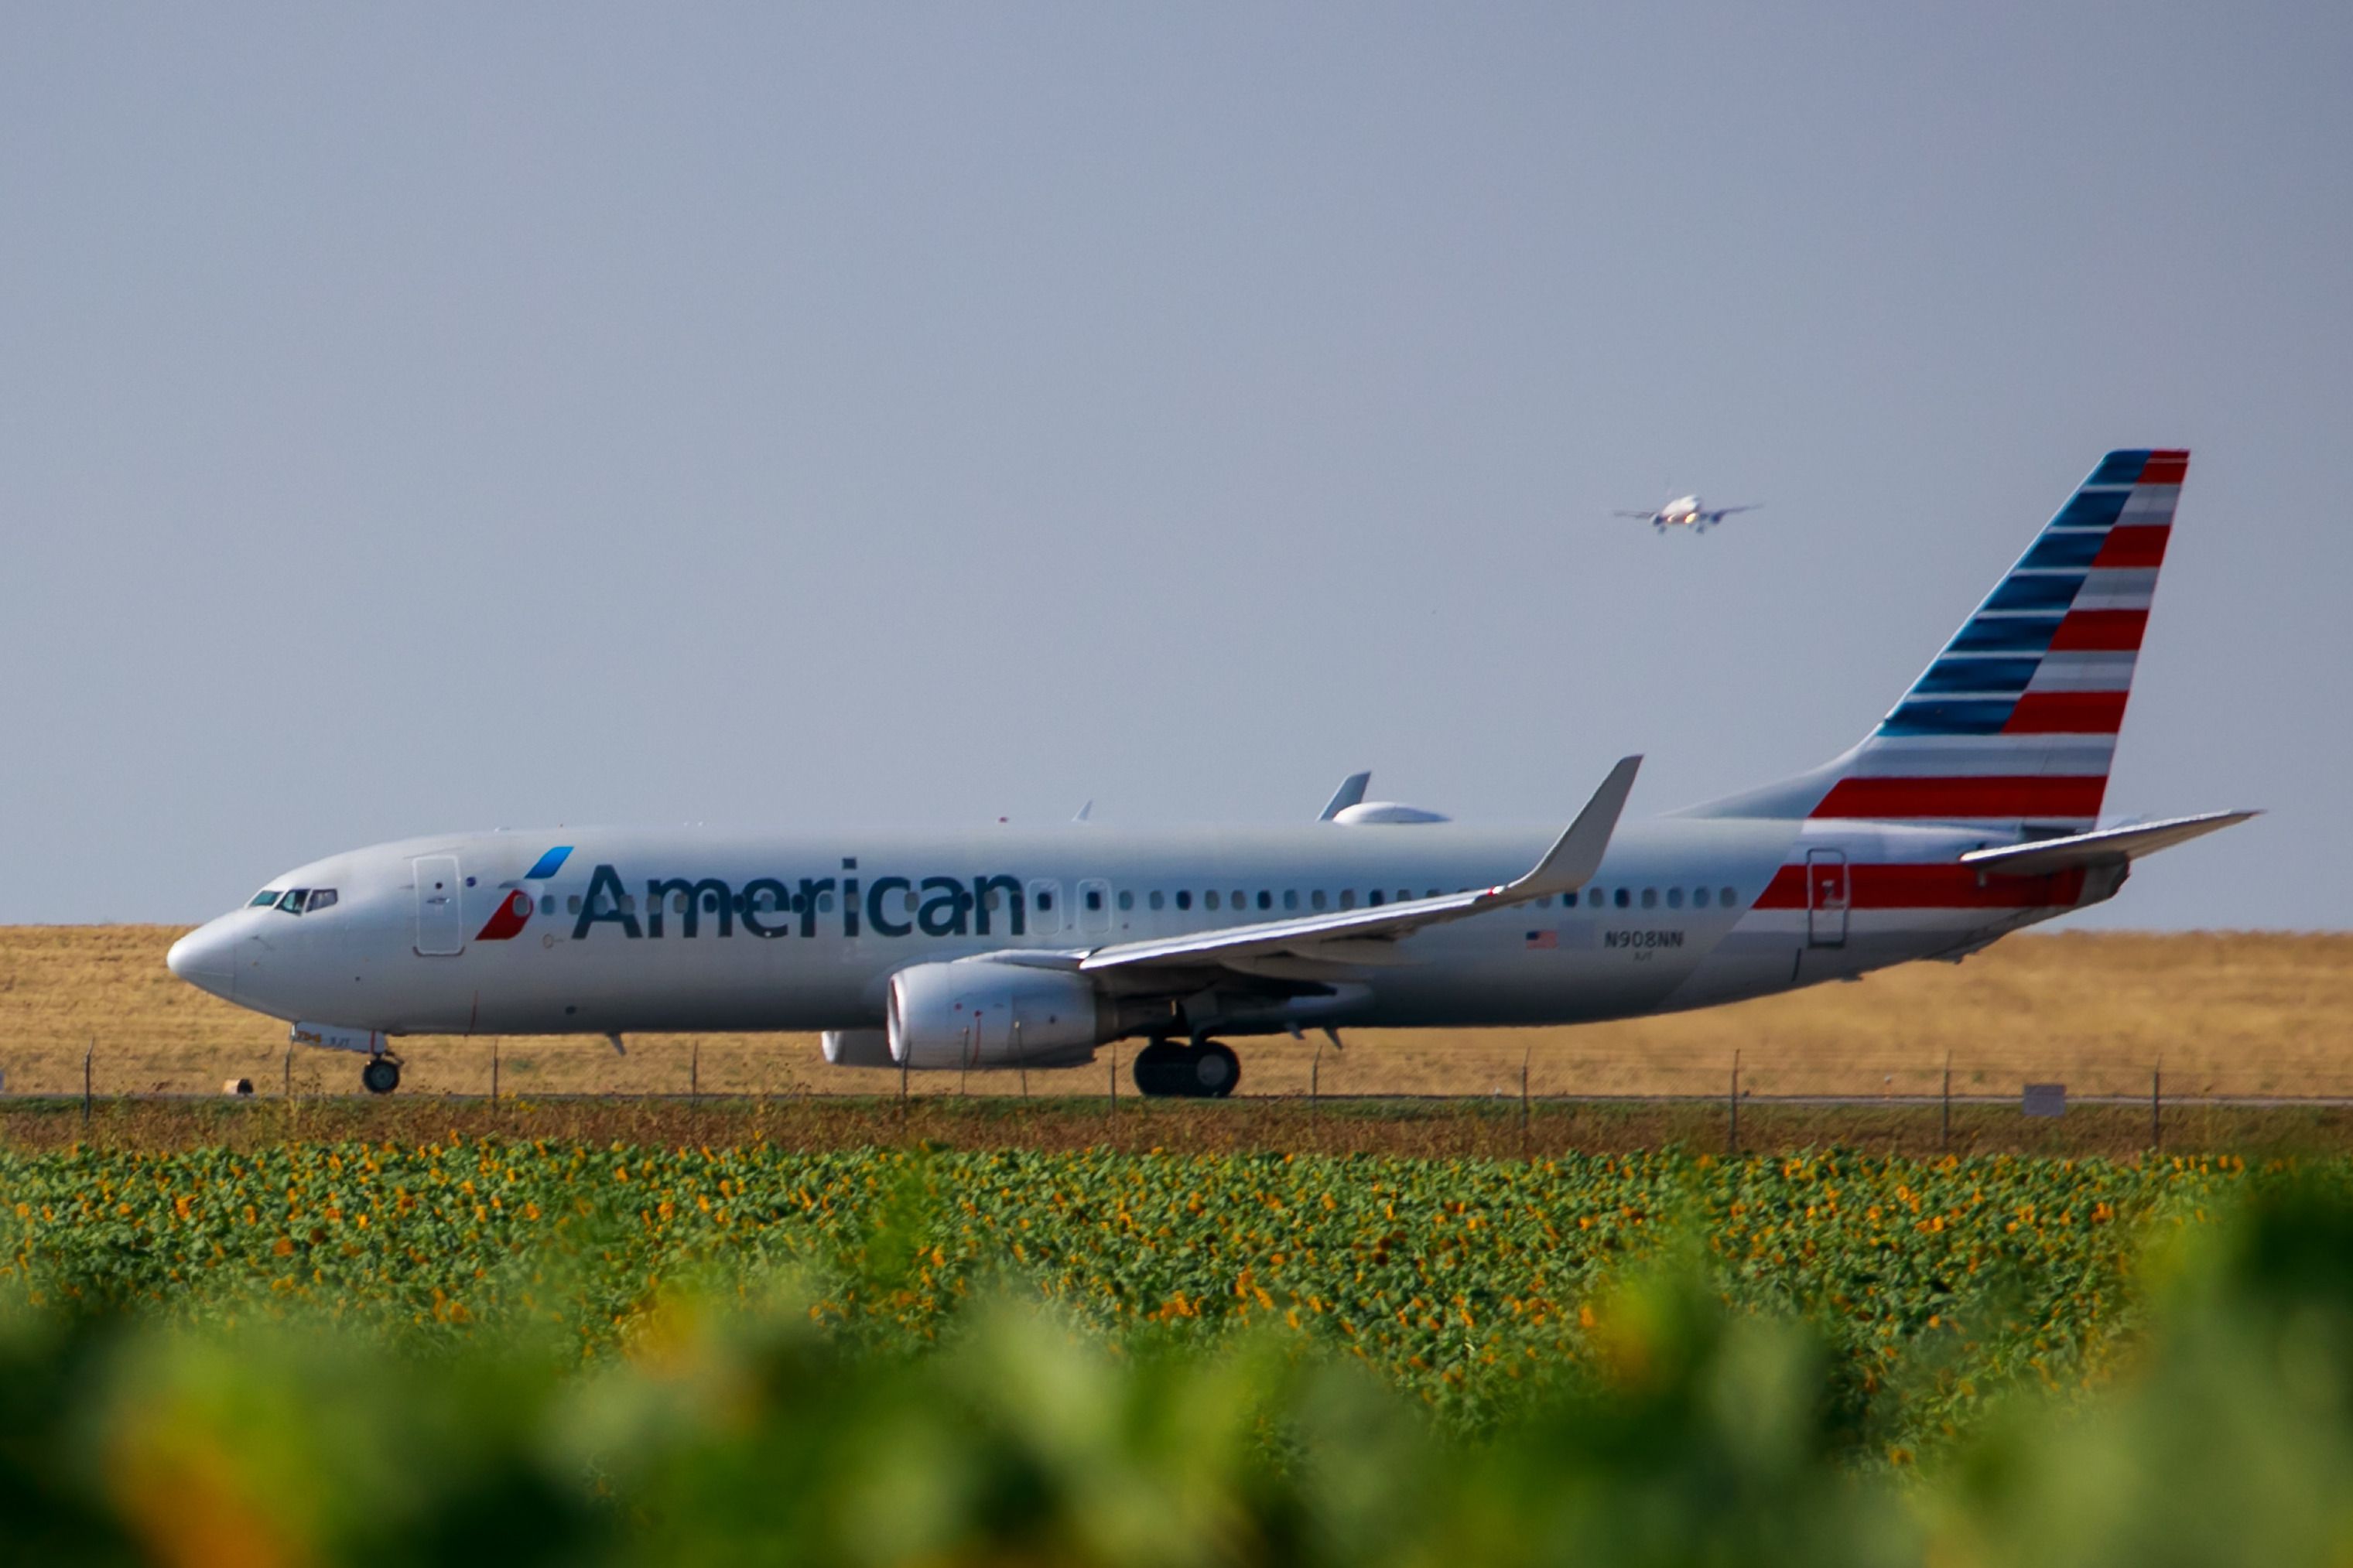 American Airlines plane in a field of sunflowers 